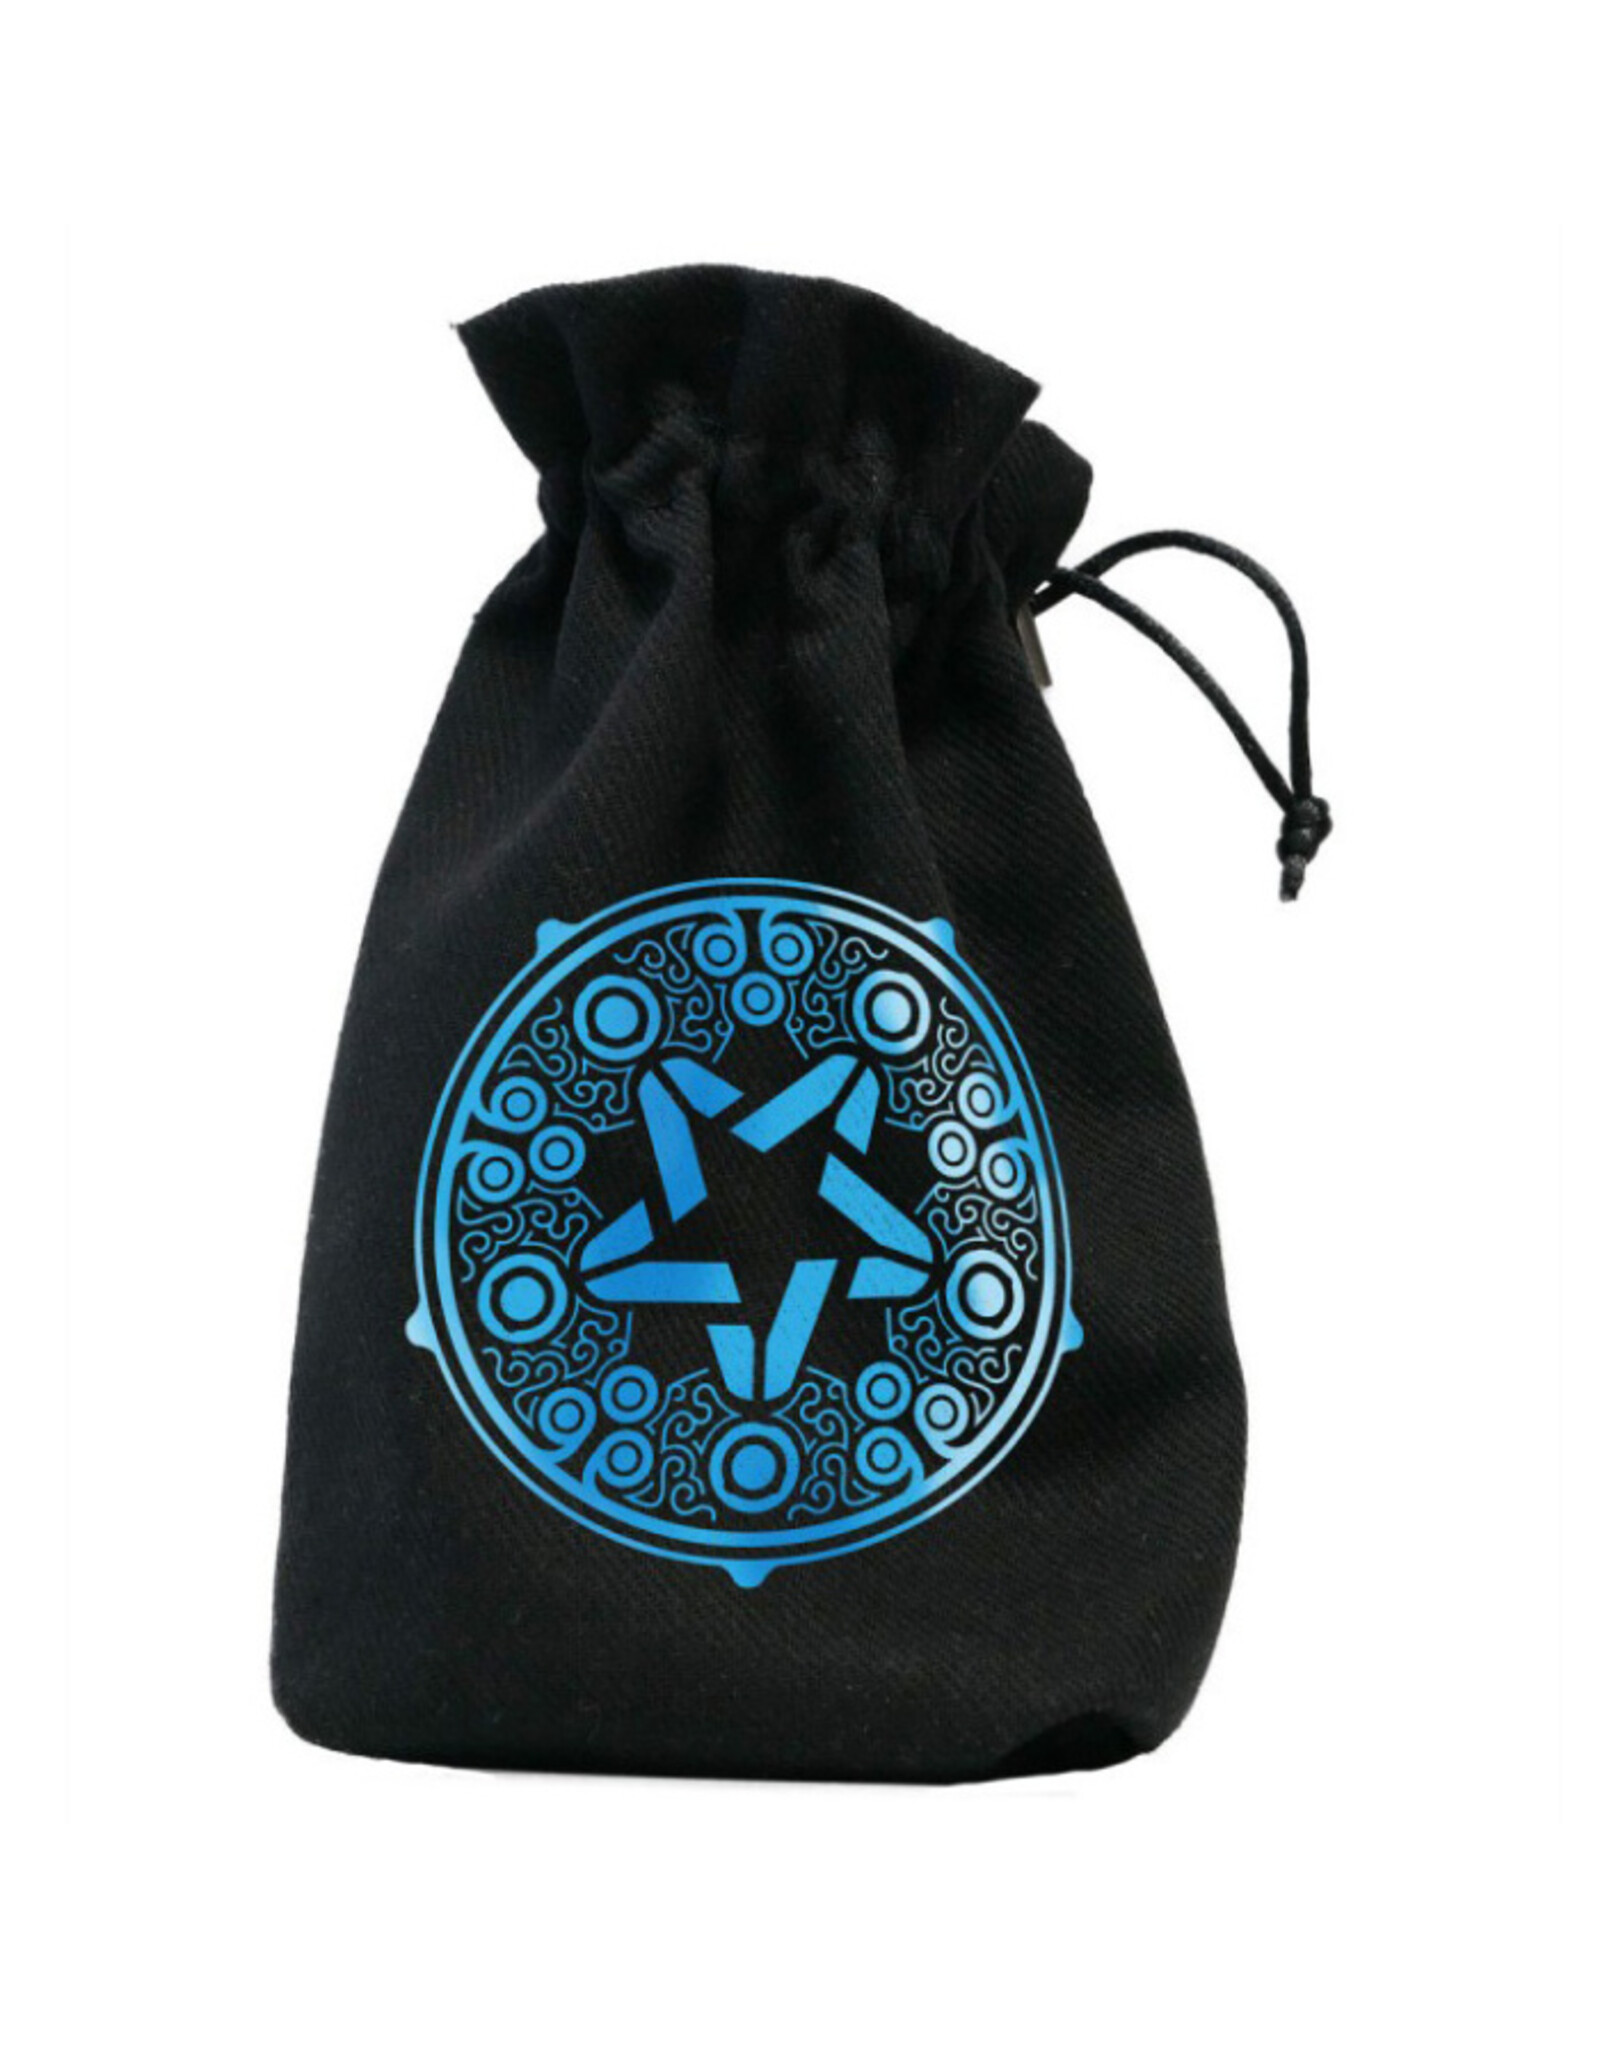 Q-Workshop Dice Bag: The Witcher: Yennefer The Last Wish